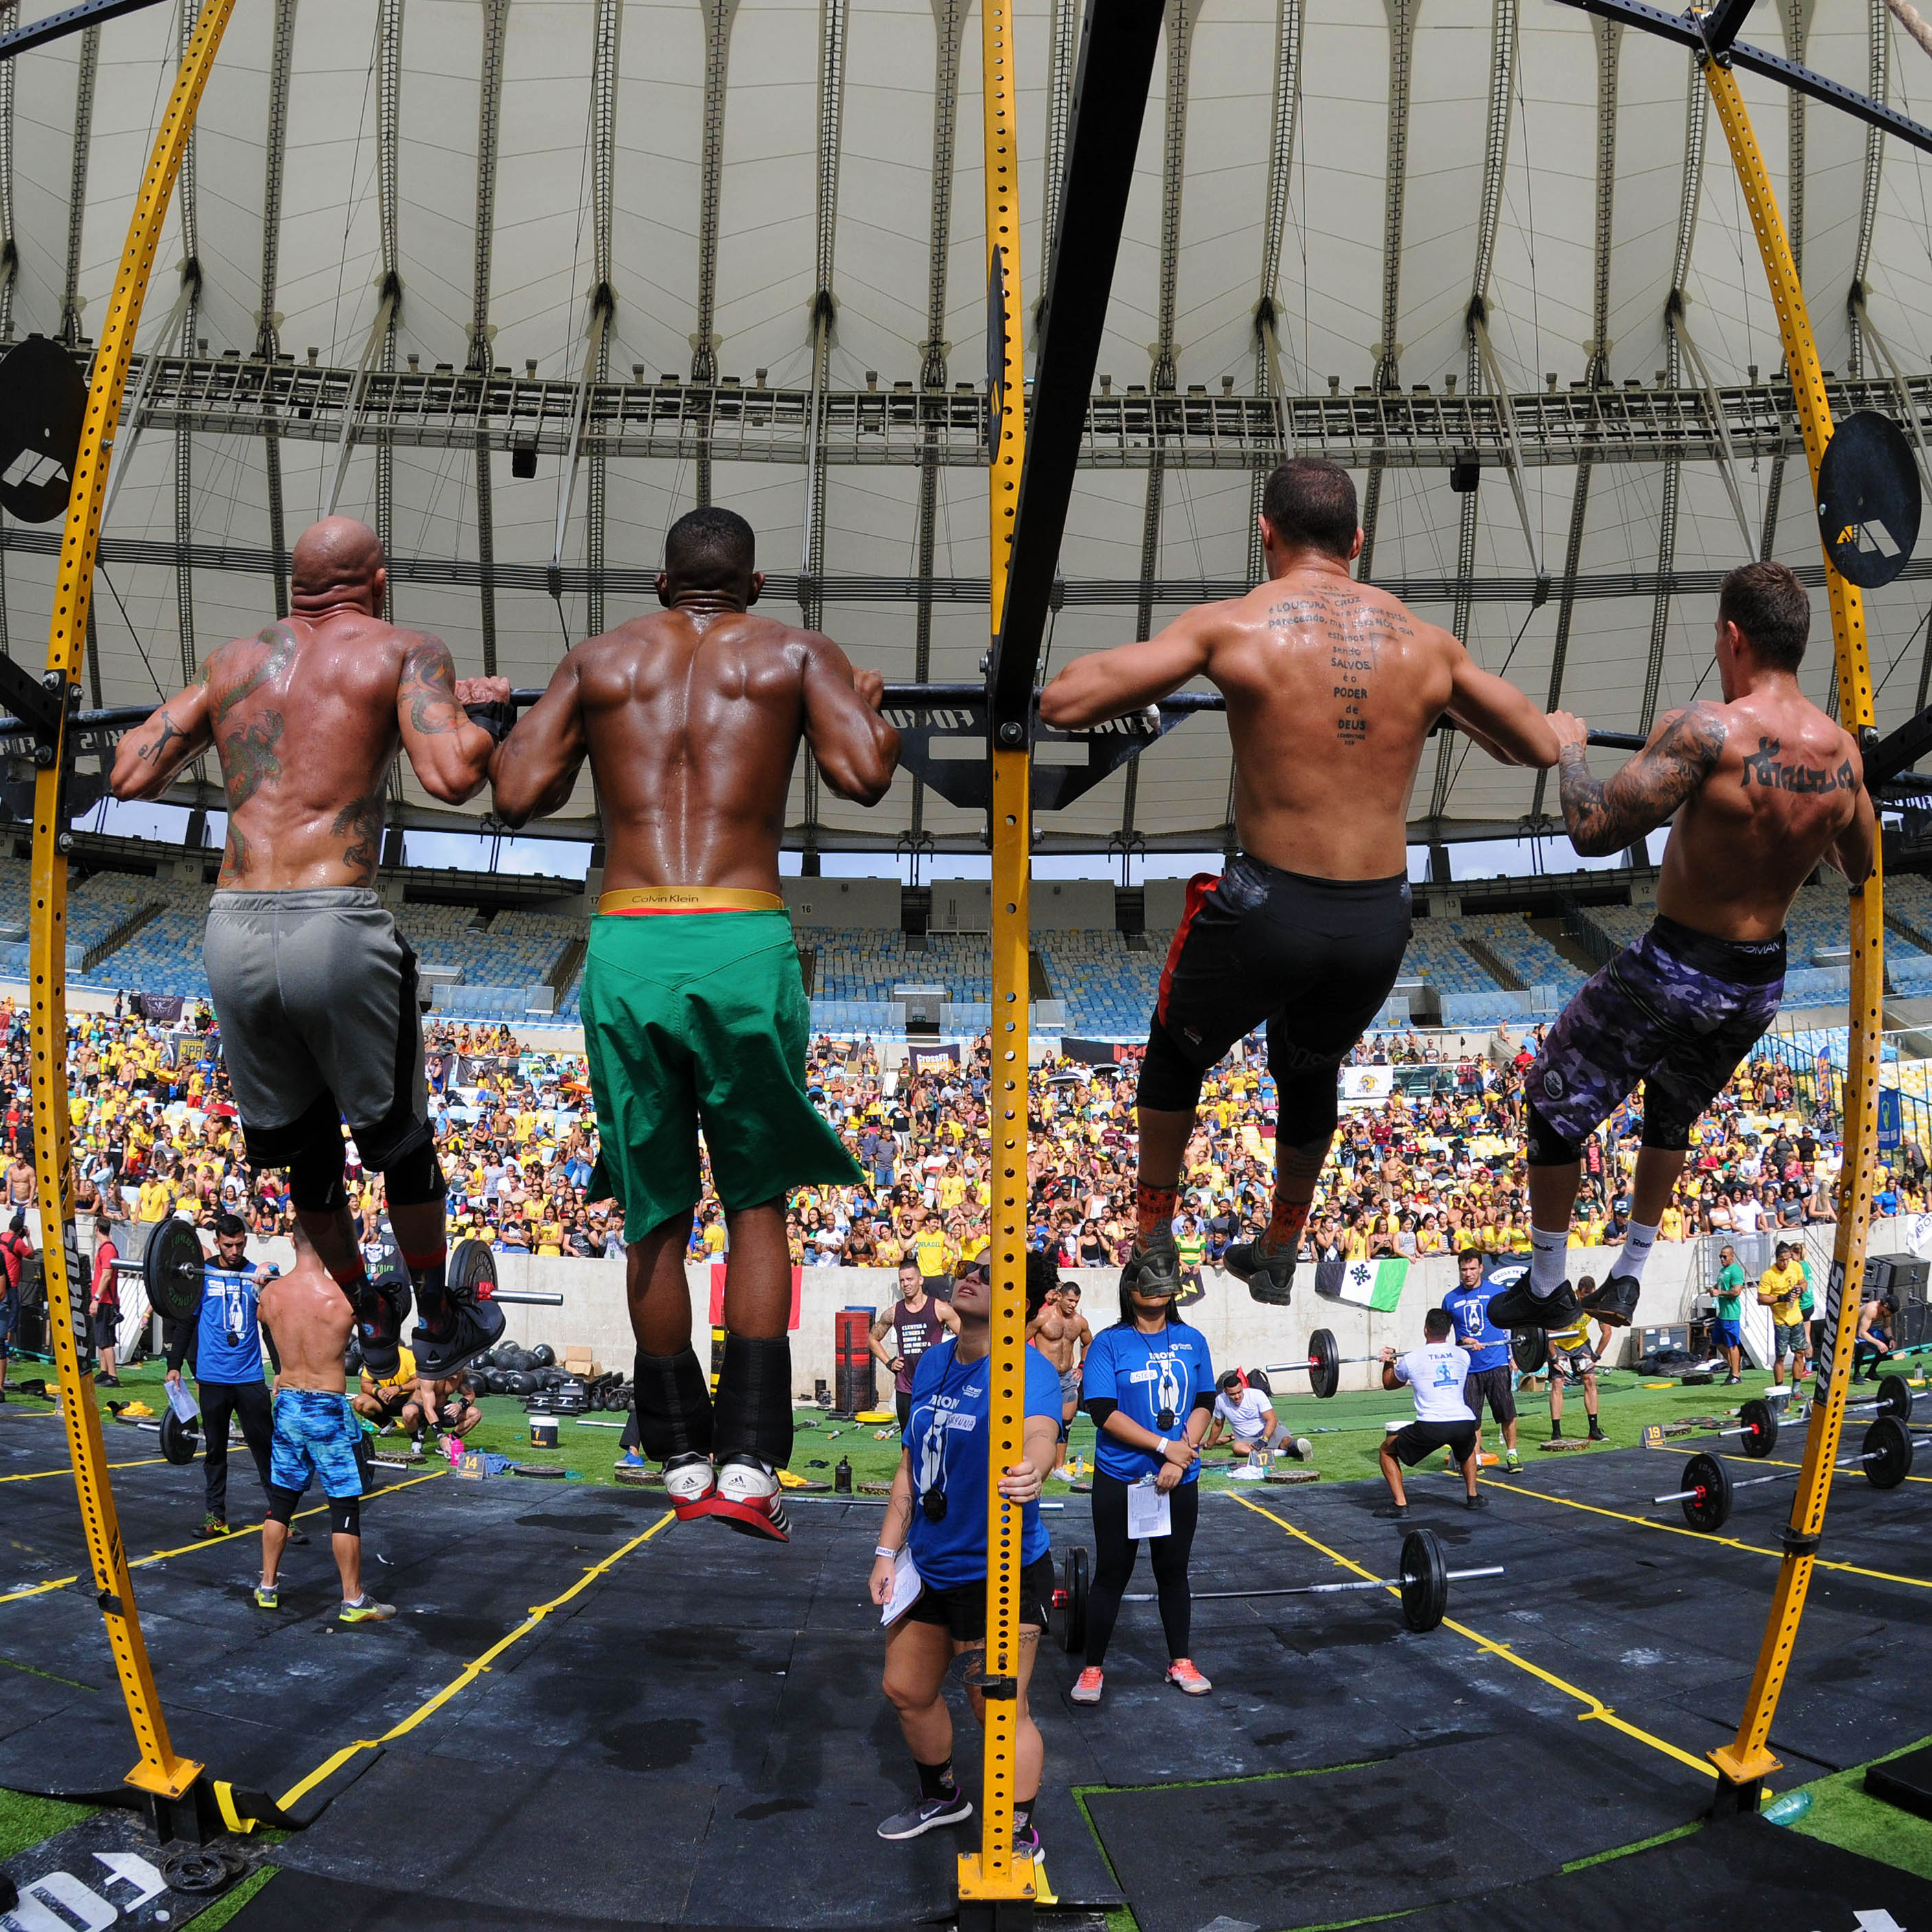 Will The CrossFit Games Be Postponed? - How The Sport Has Been Affected By Coronavirus So Far